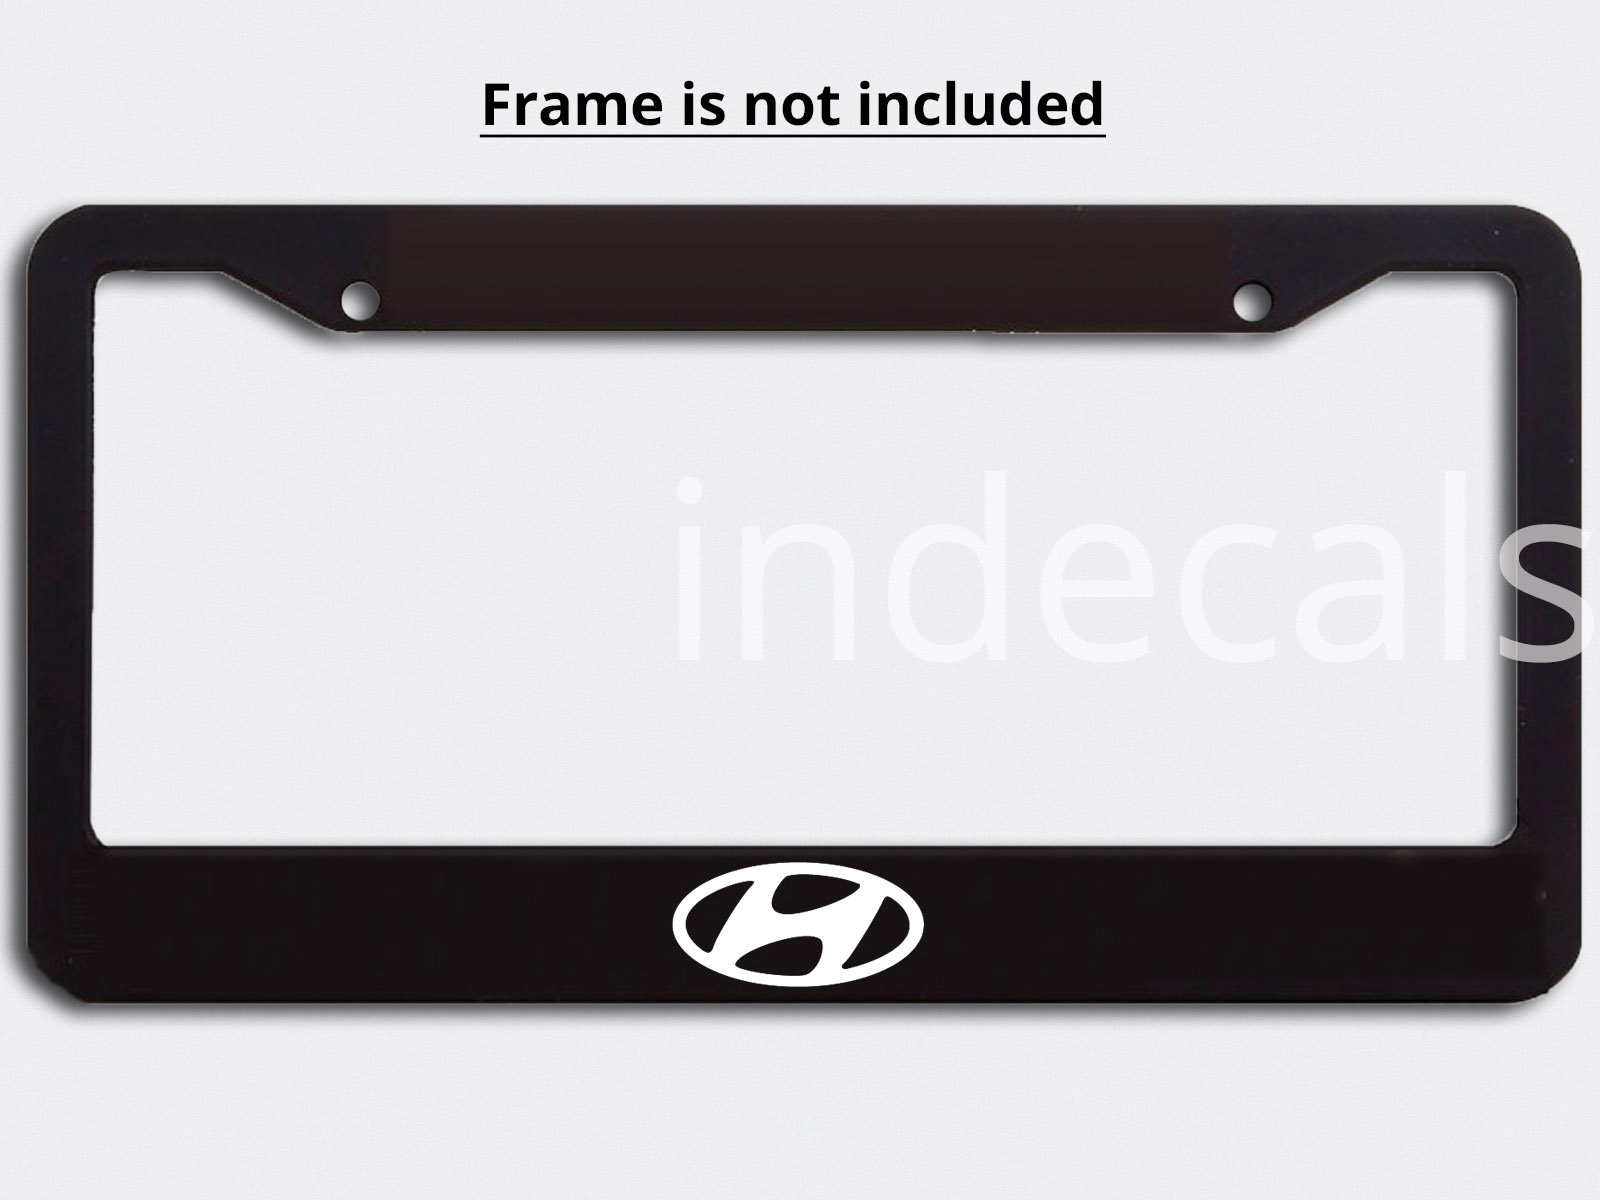 3 x Hyundai Stickers for License Plate Frame - White